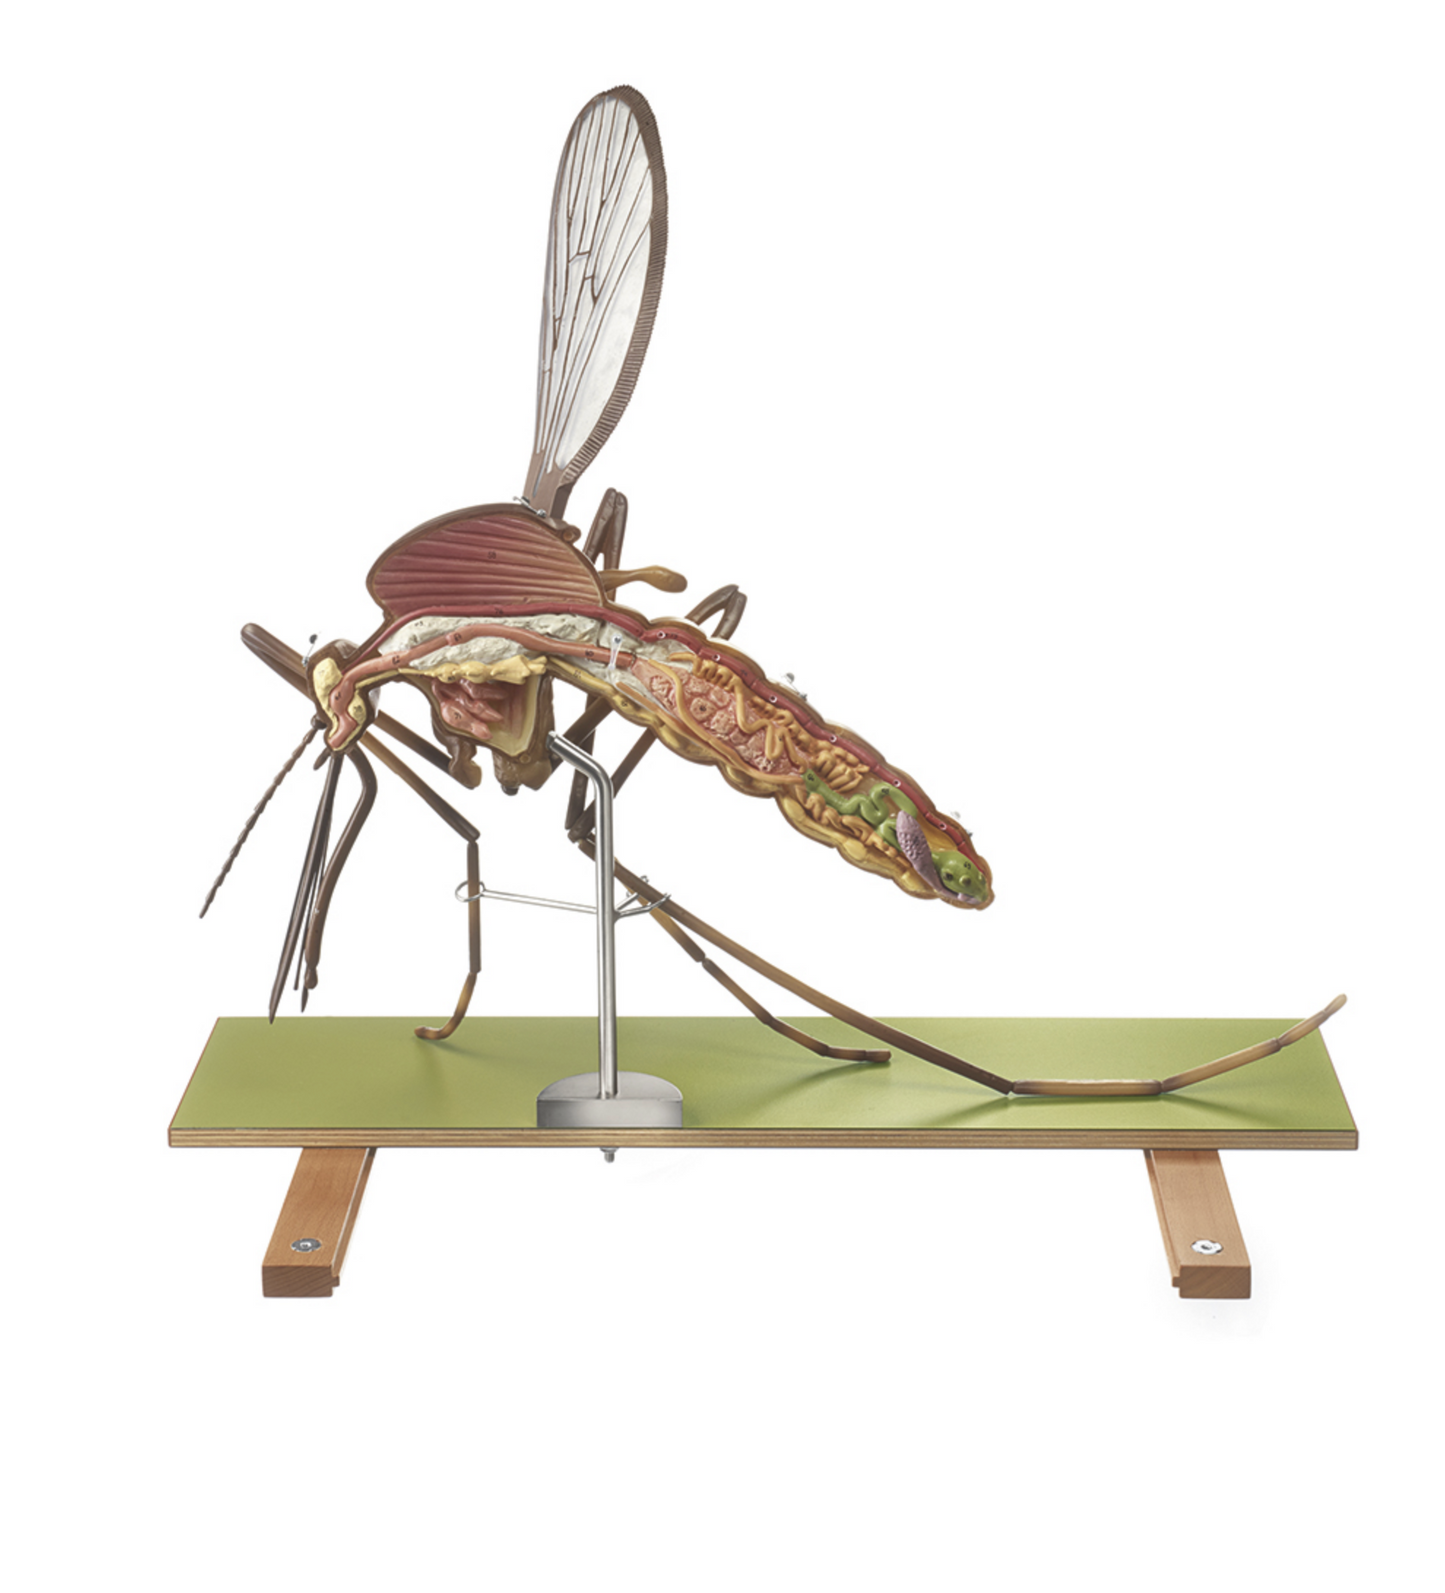 Model of a mosquito (Culex pipiens) in the highest quality and greatly enlarged. Can be separated into 7 parts